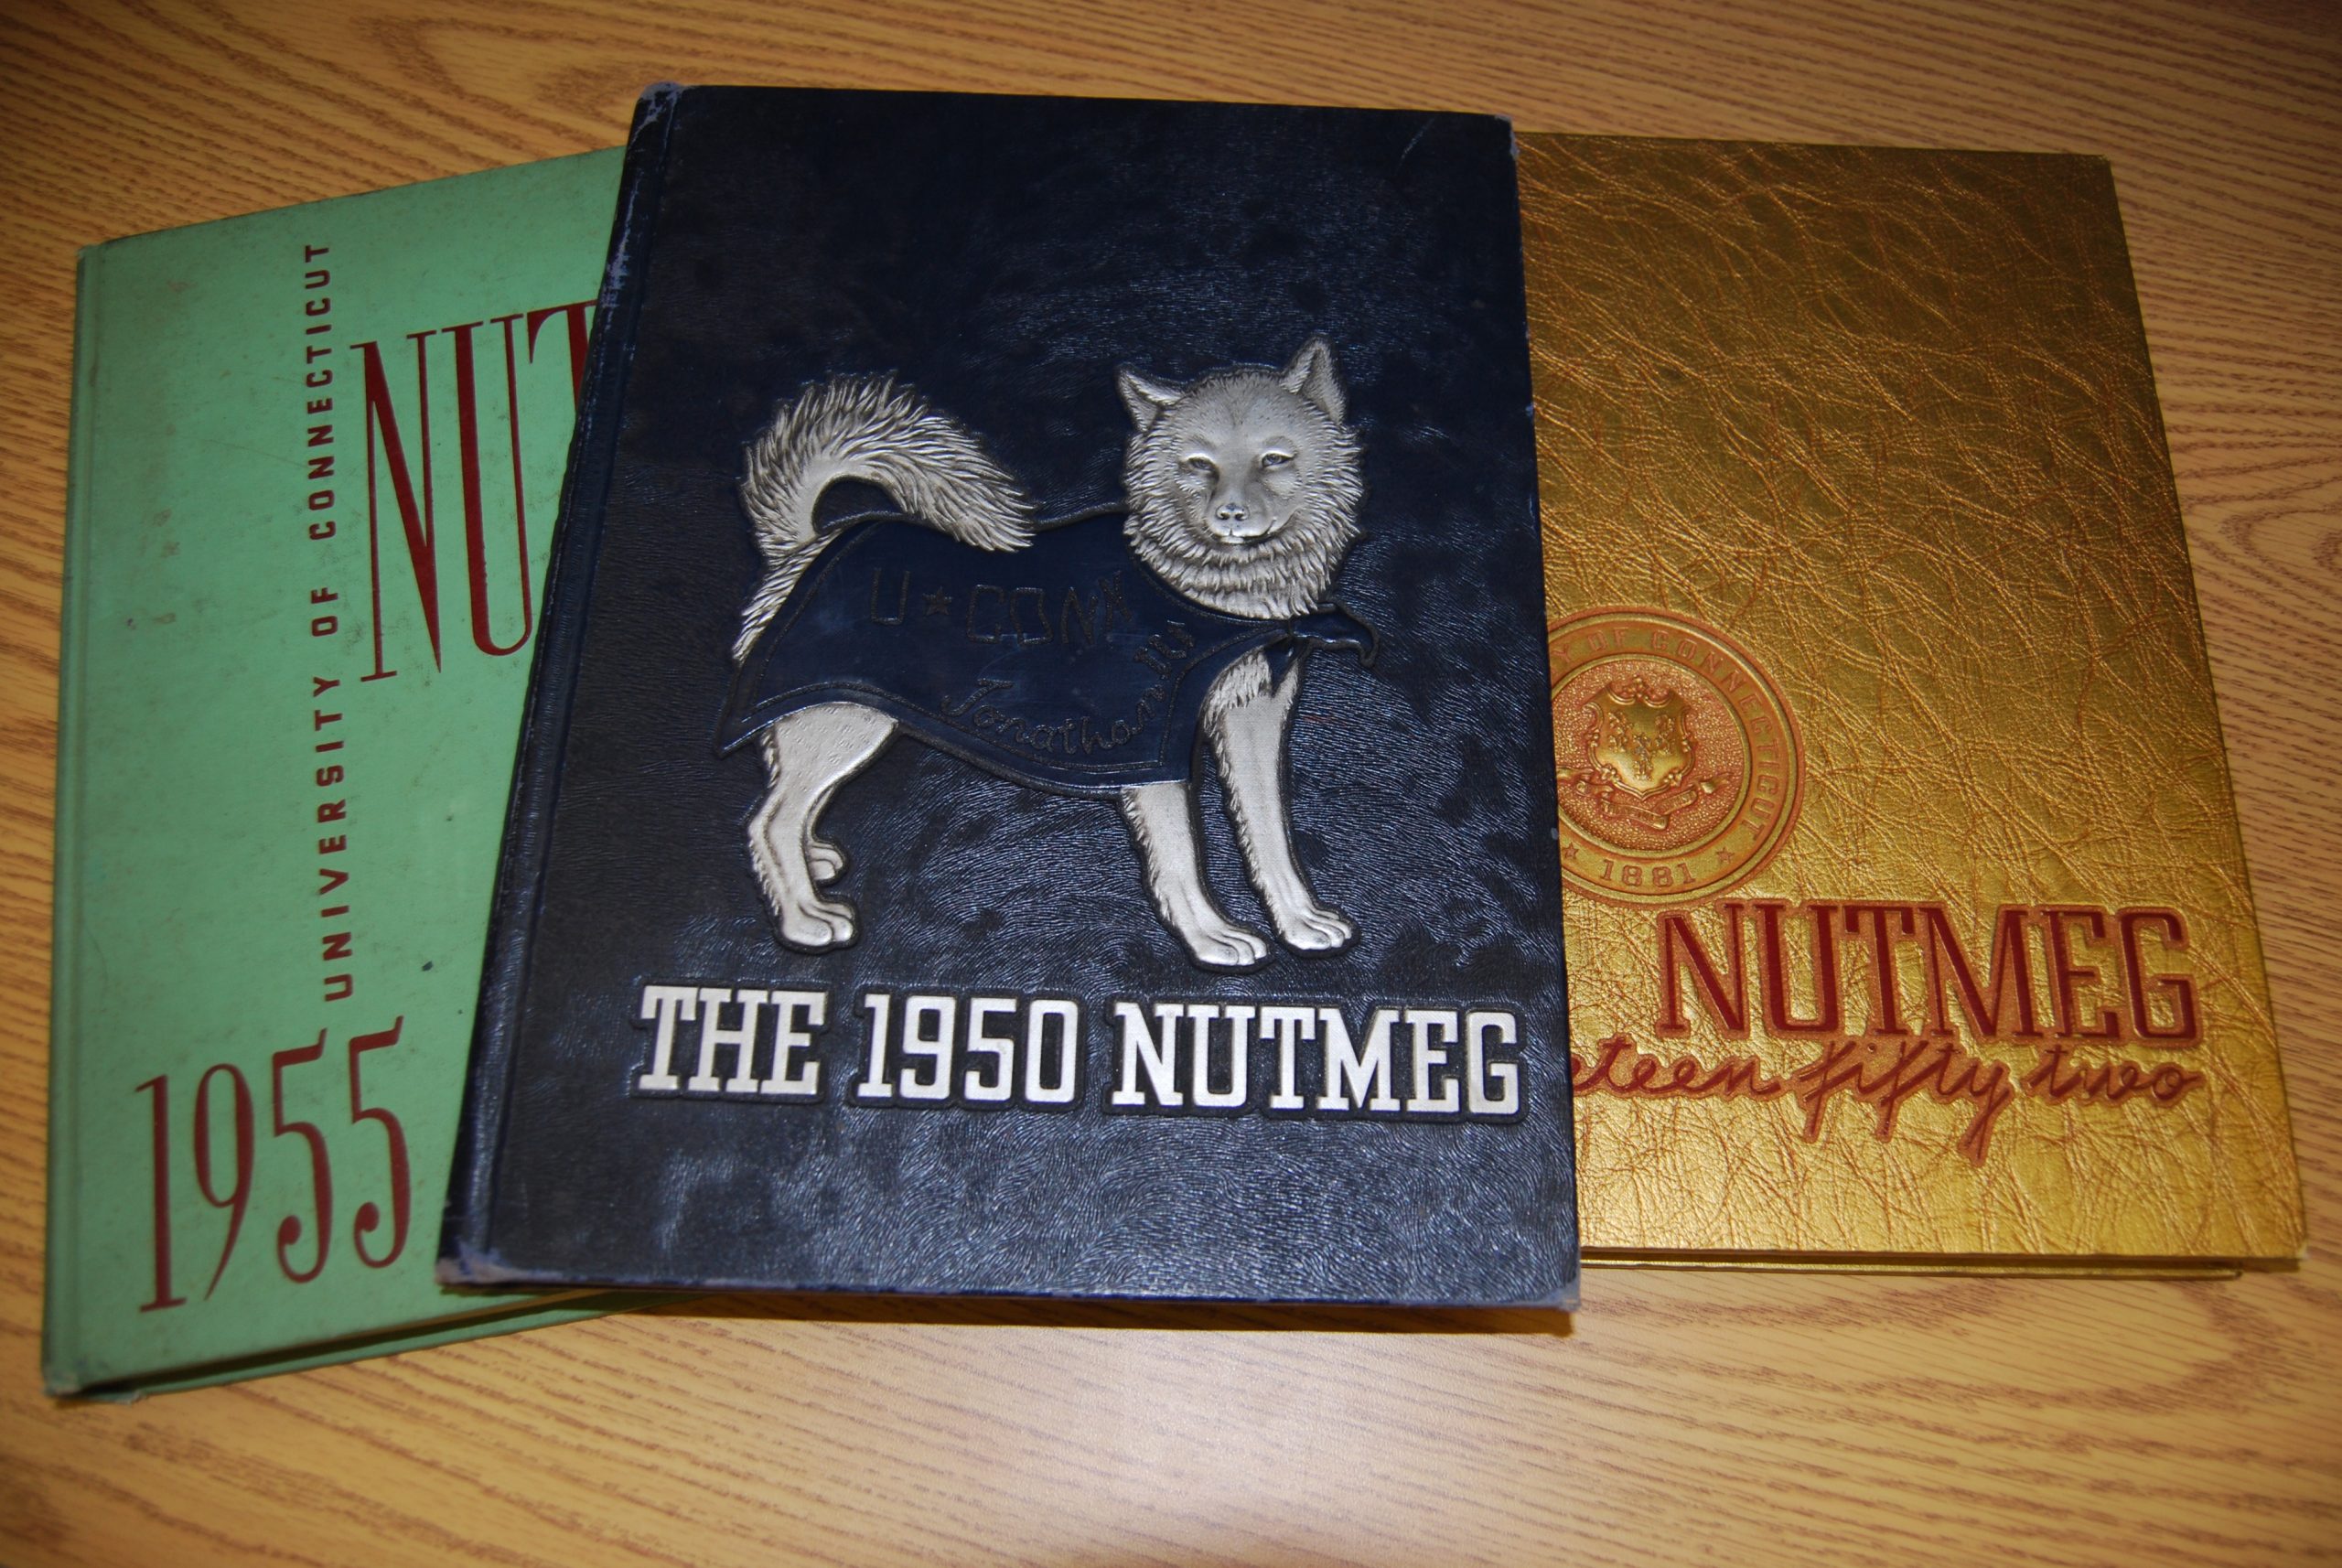 Nutmeg yearbooks on a table